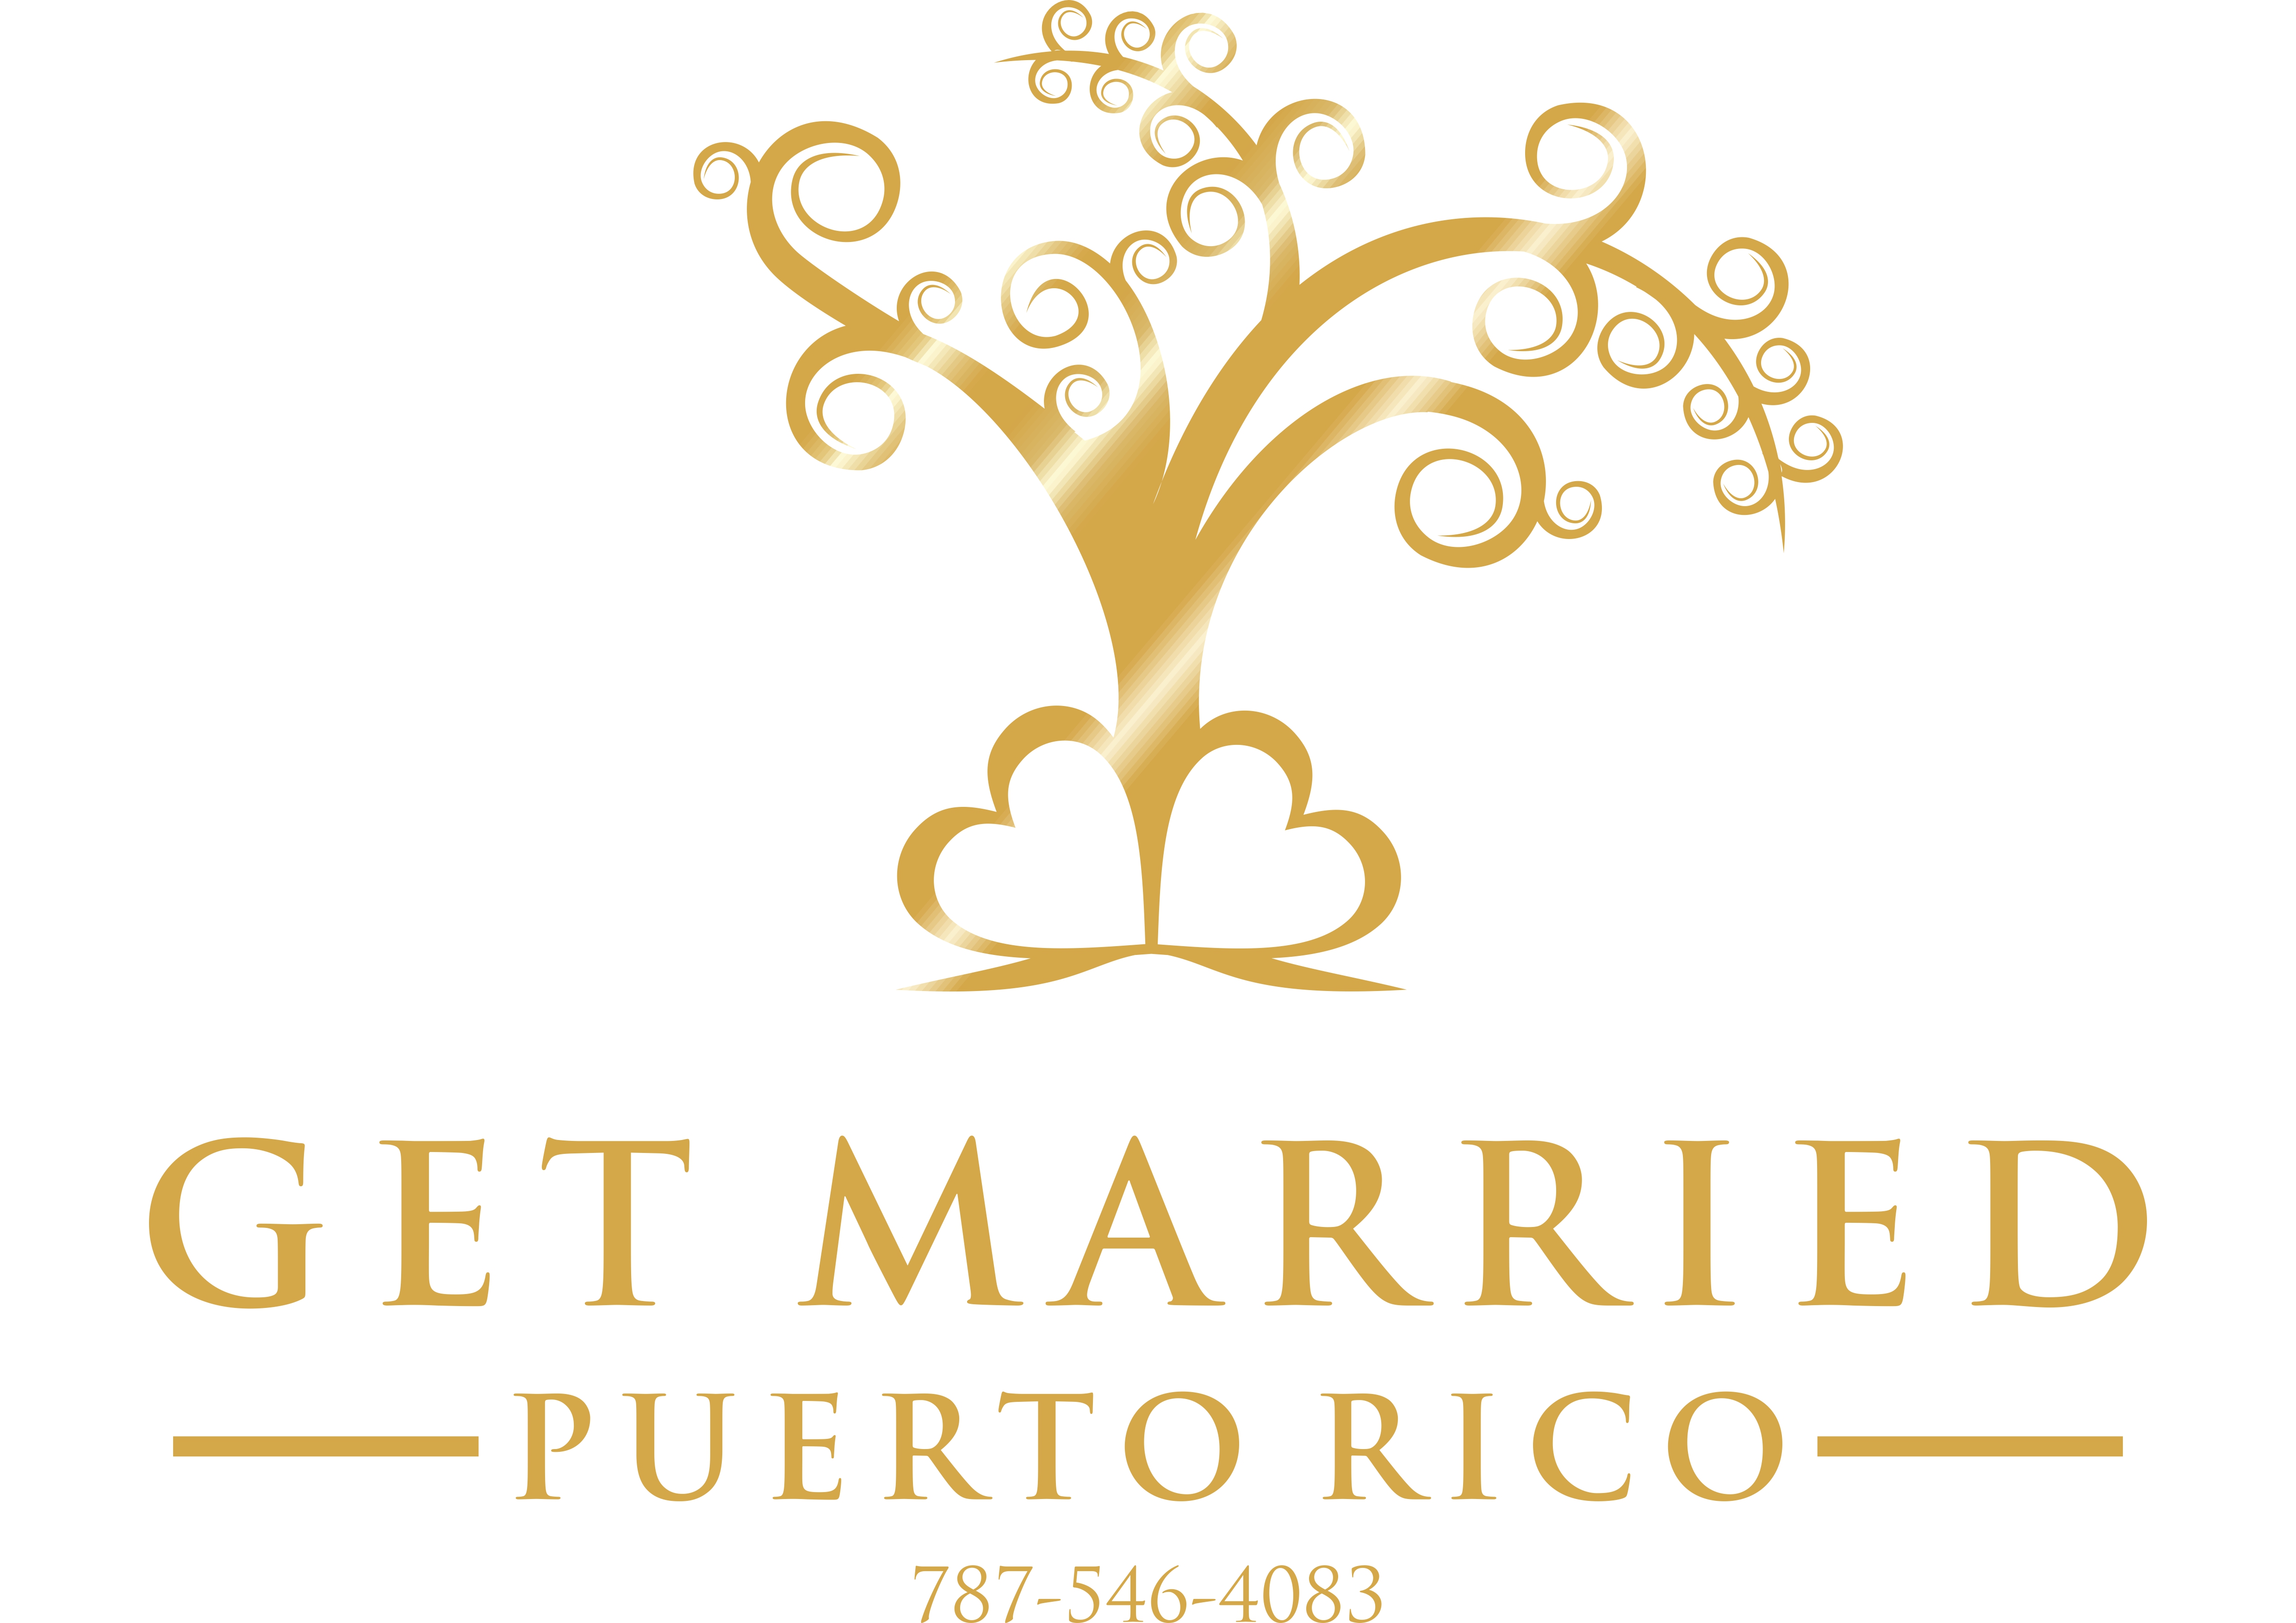 Get Married Puerto Rico